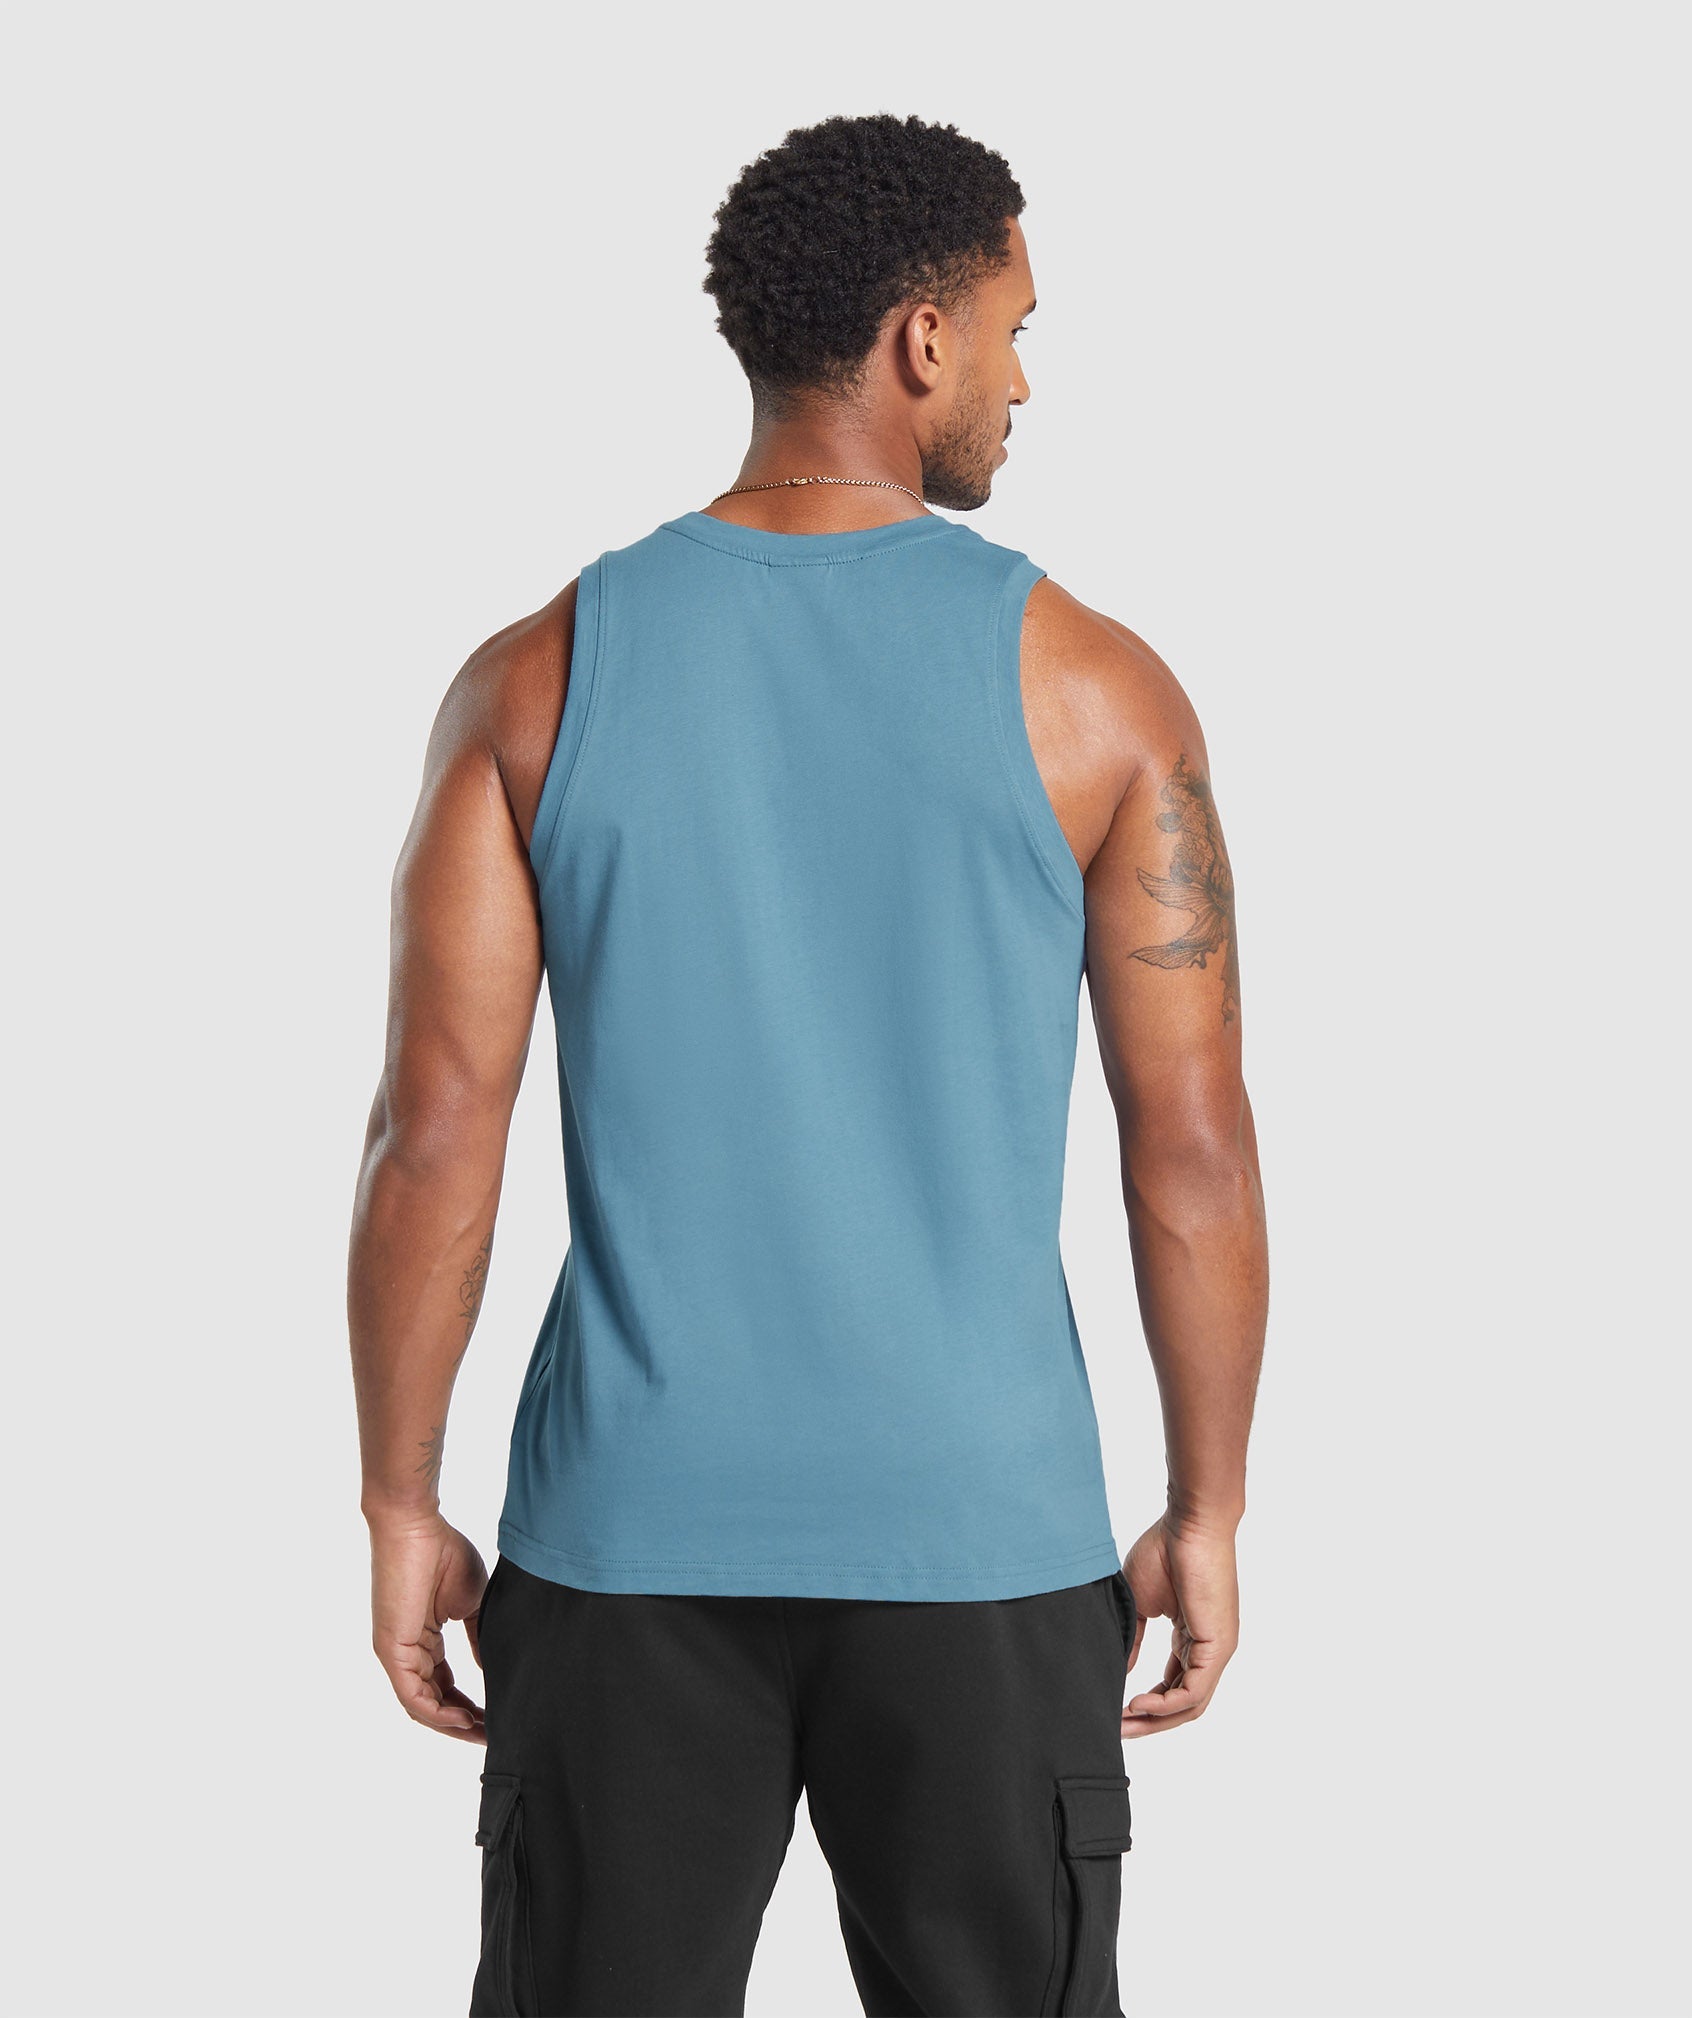 Crest Tank in Faded Blue - view 2